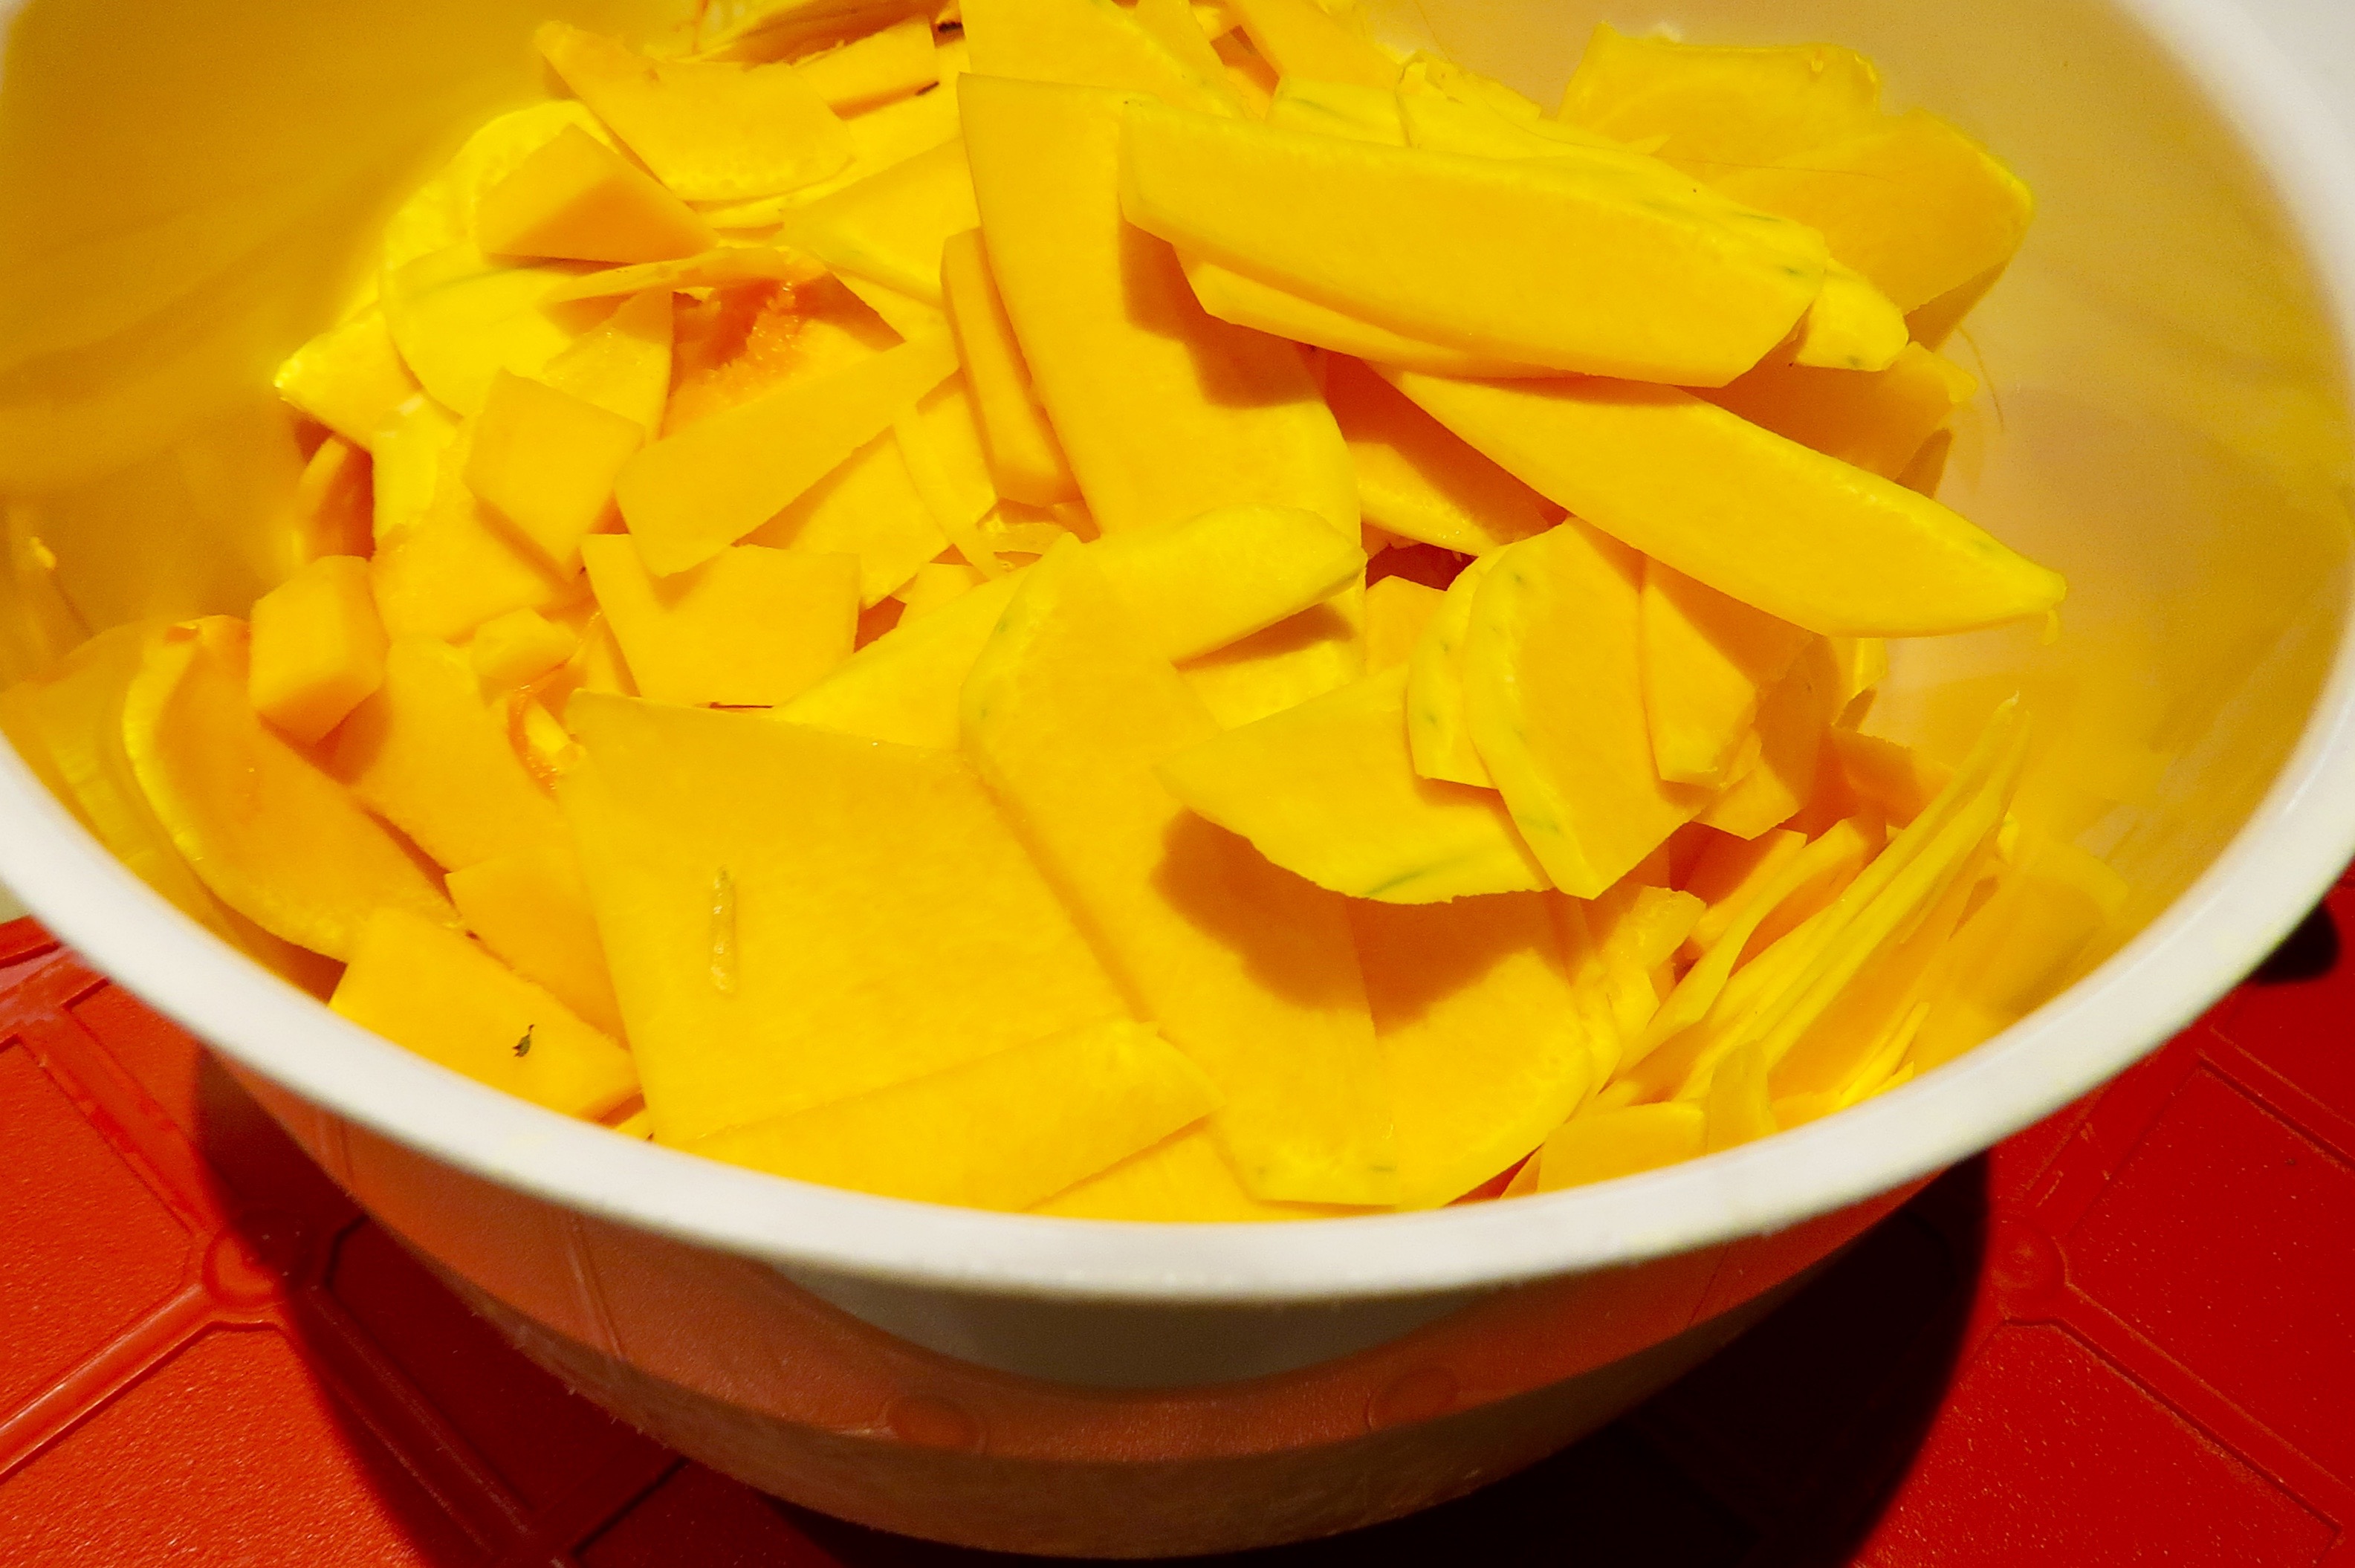 THE SQUASH, THINLY SLICED